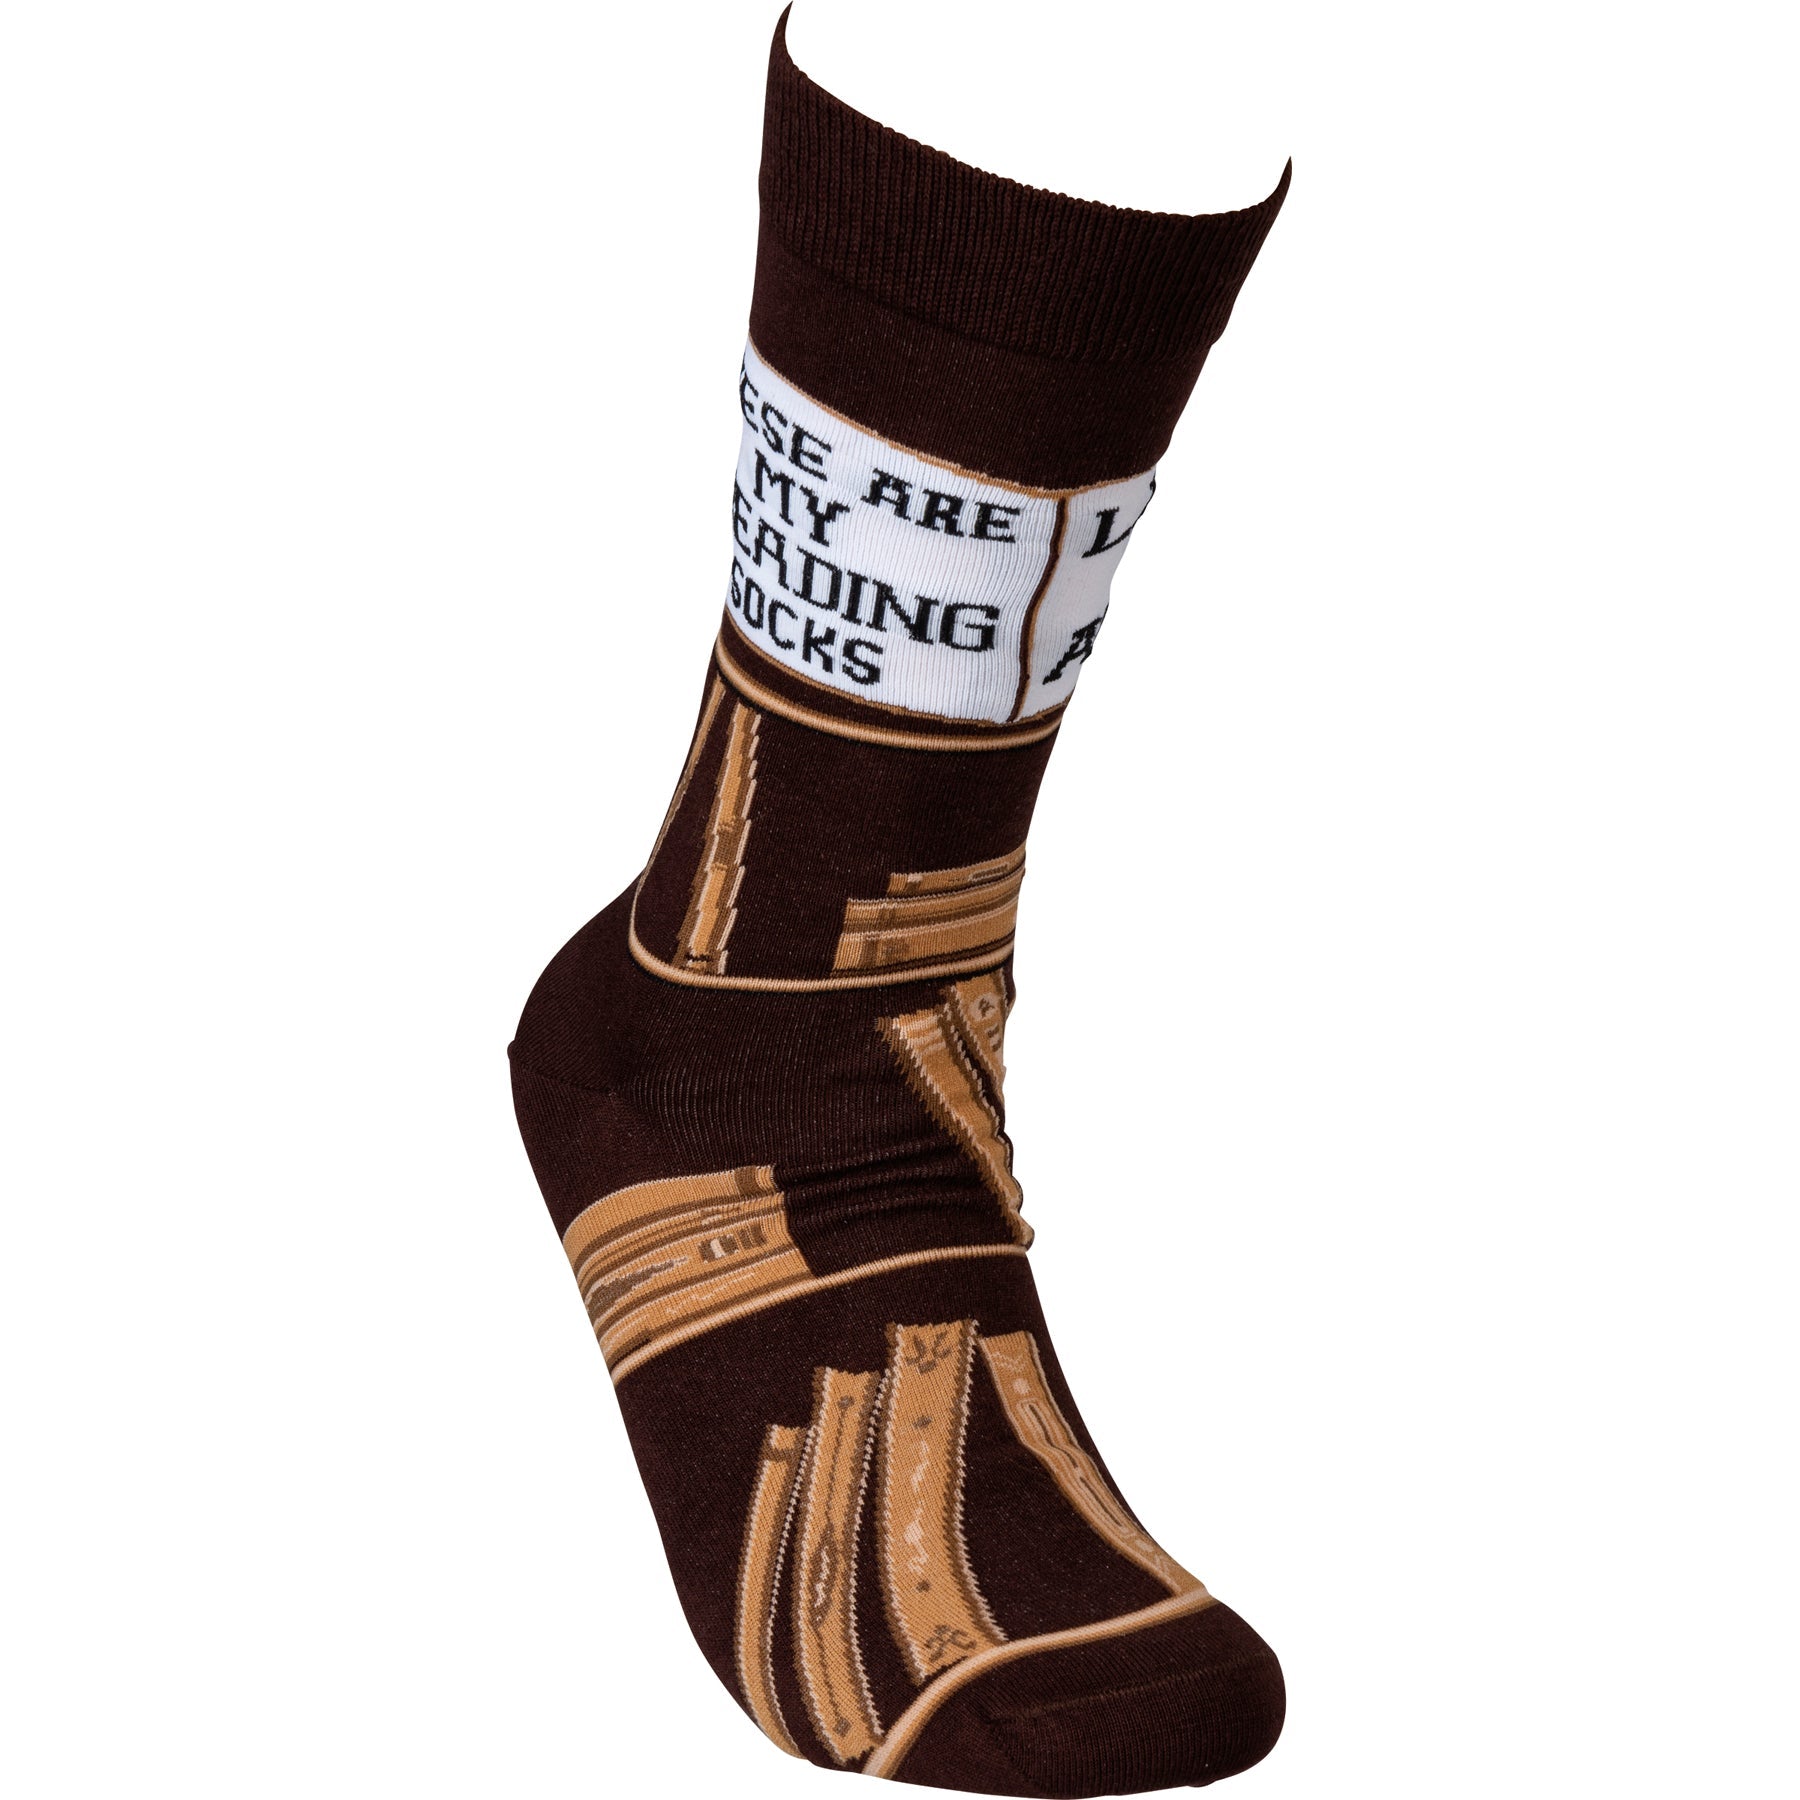 These Are My Reading Socks | Unisex Book Lover Socks